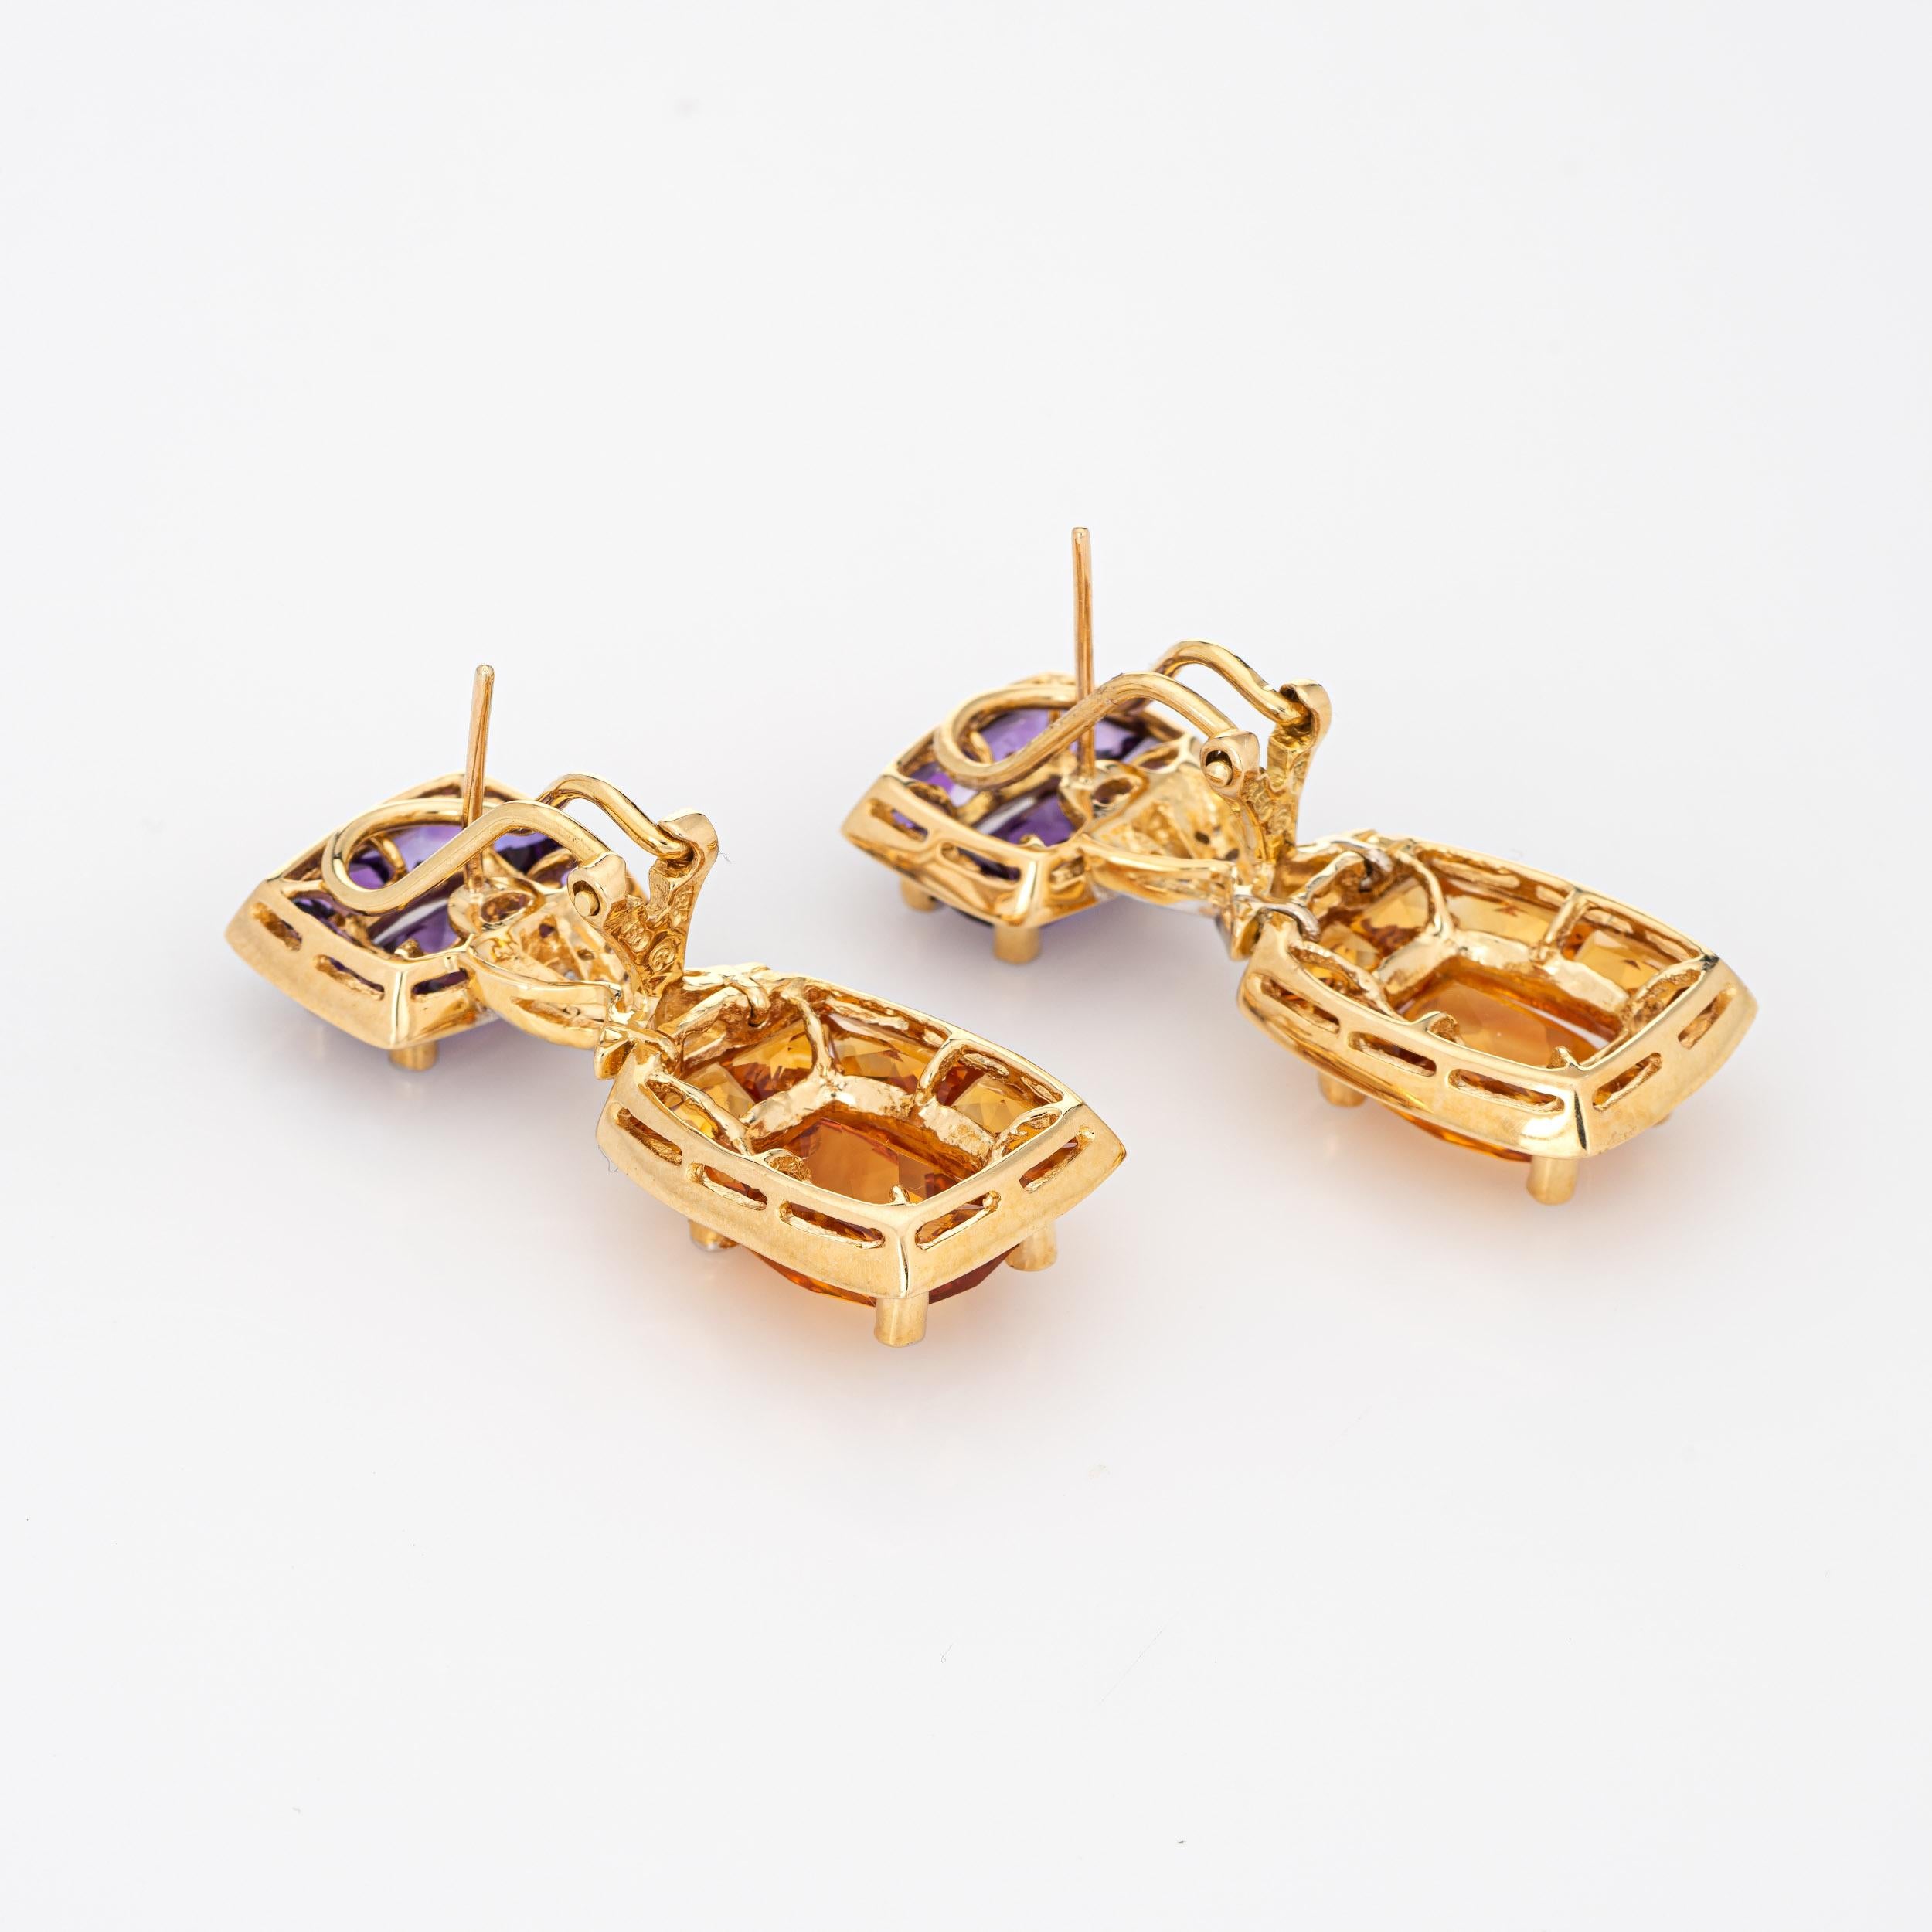 Elegant pair of estate citrine, amethyst & diamond drops crafted in 18k yellow gold. 

Checkerboard faceted amethysts total an estimated 9 carats, accented with an estimated 18 carats of checkerboard faceted citrines. Diamonds total an estimated